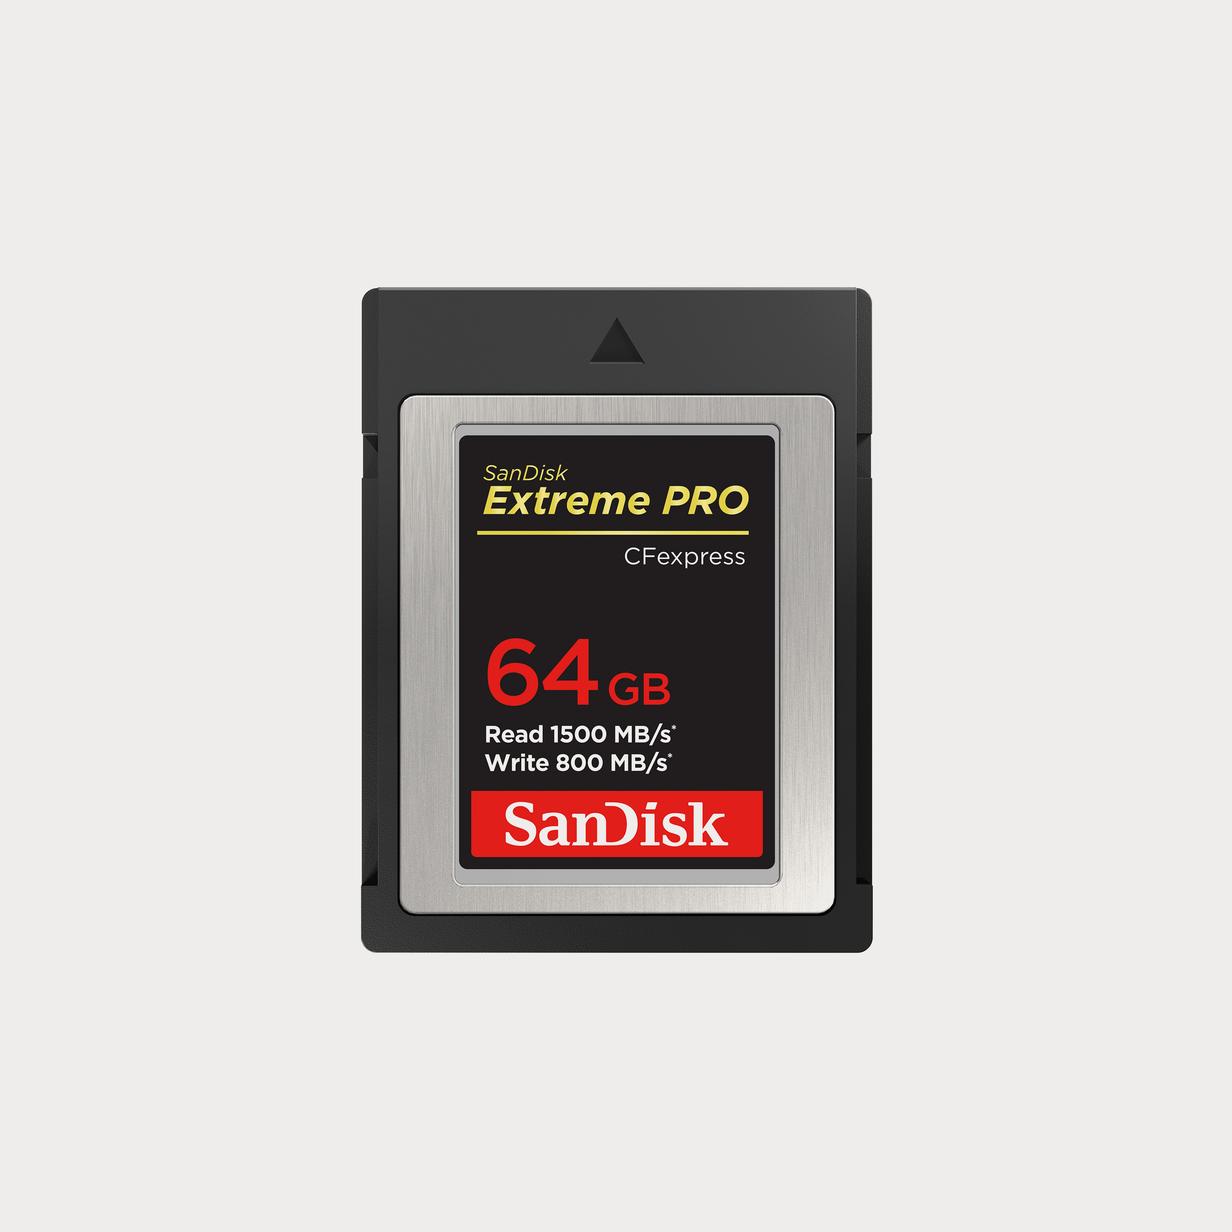 Moment sandisk SDCFE 064 G ANCNN Extreme Pro C Fexpress Card 64 GB 01